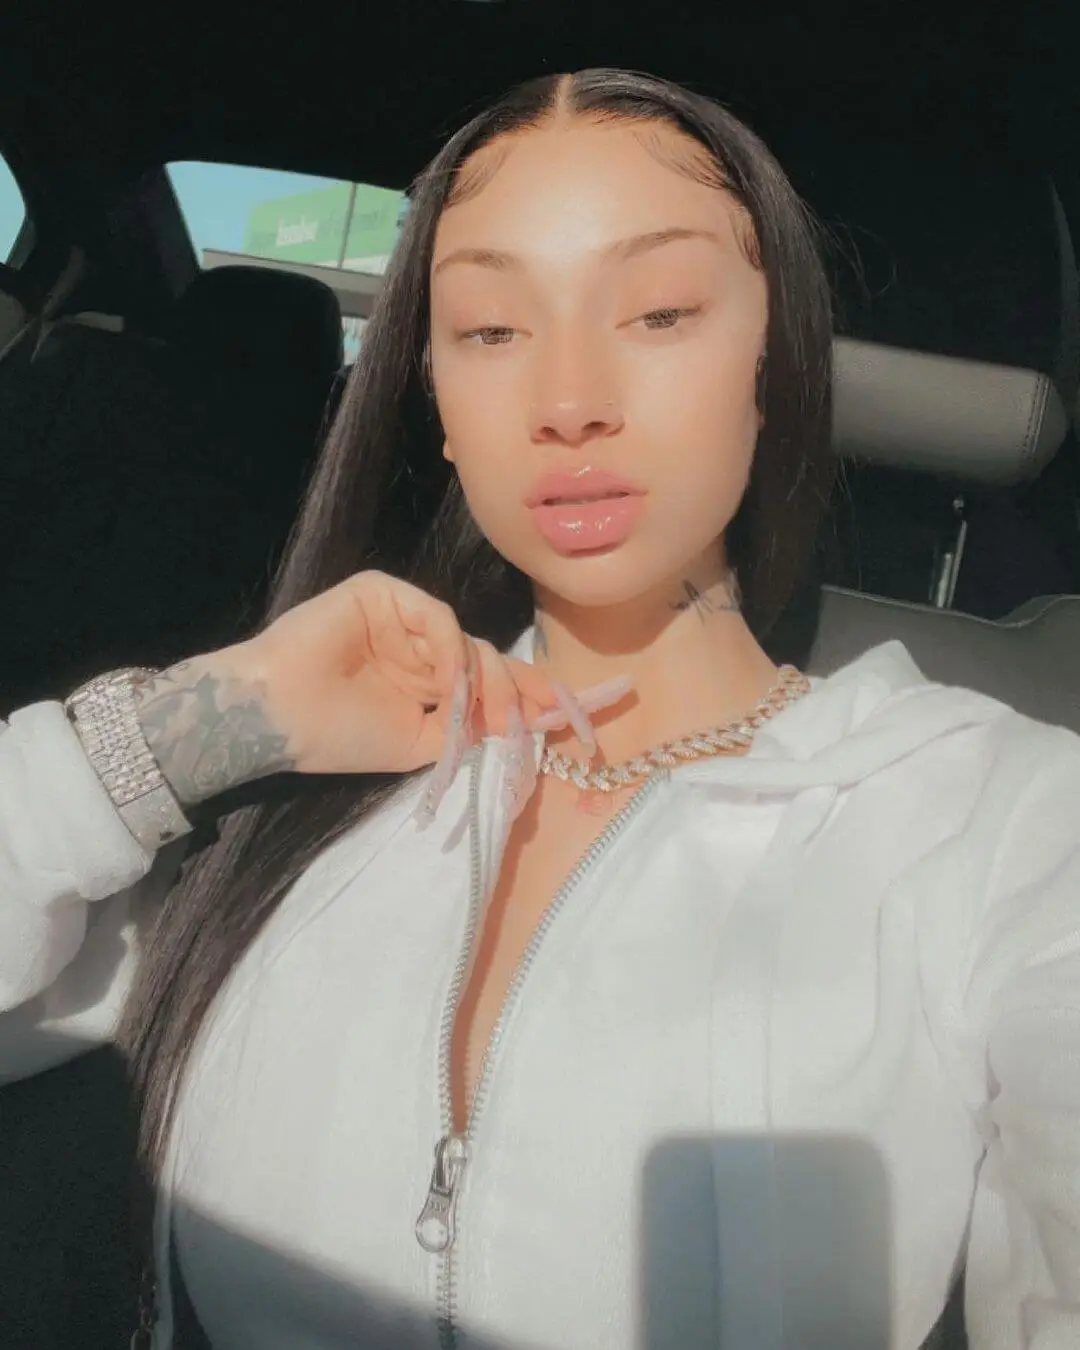 Bhad bhabie in her car